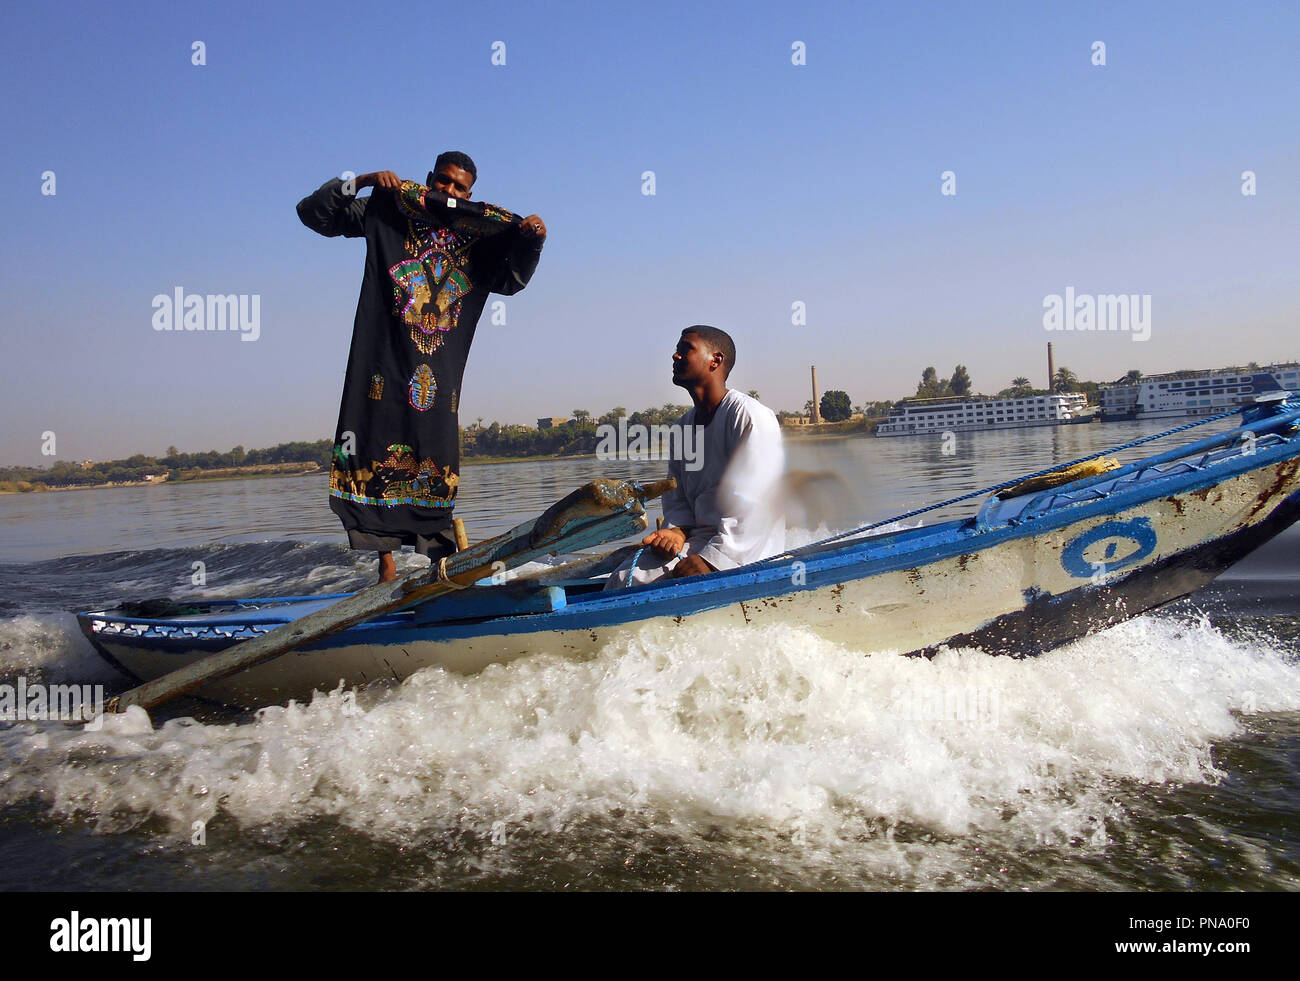 Two men in a fast boat try to sell carpets and other items to